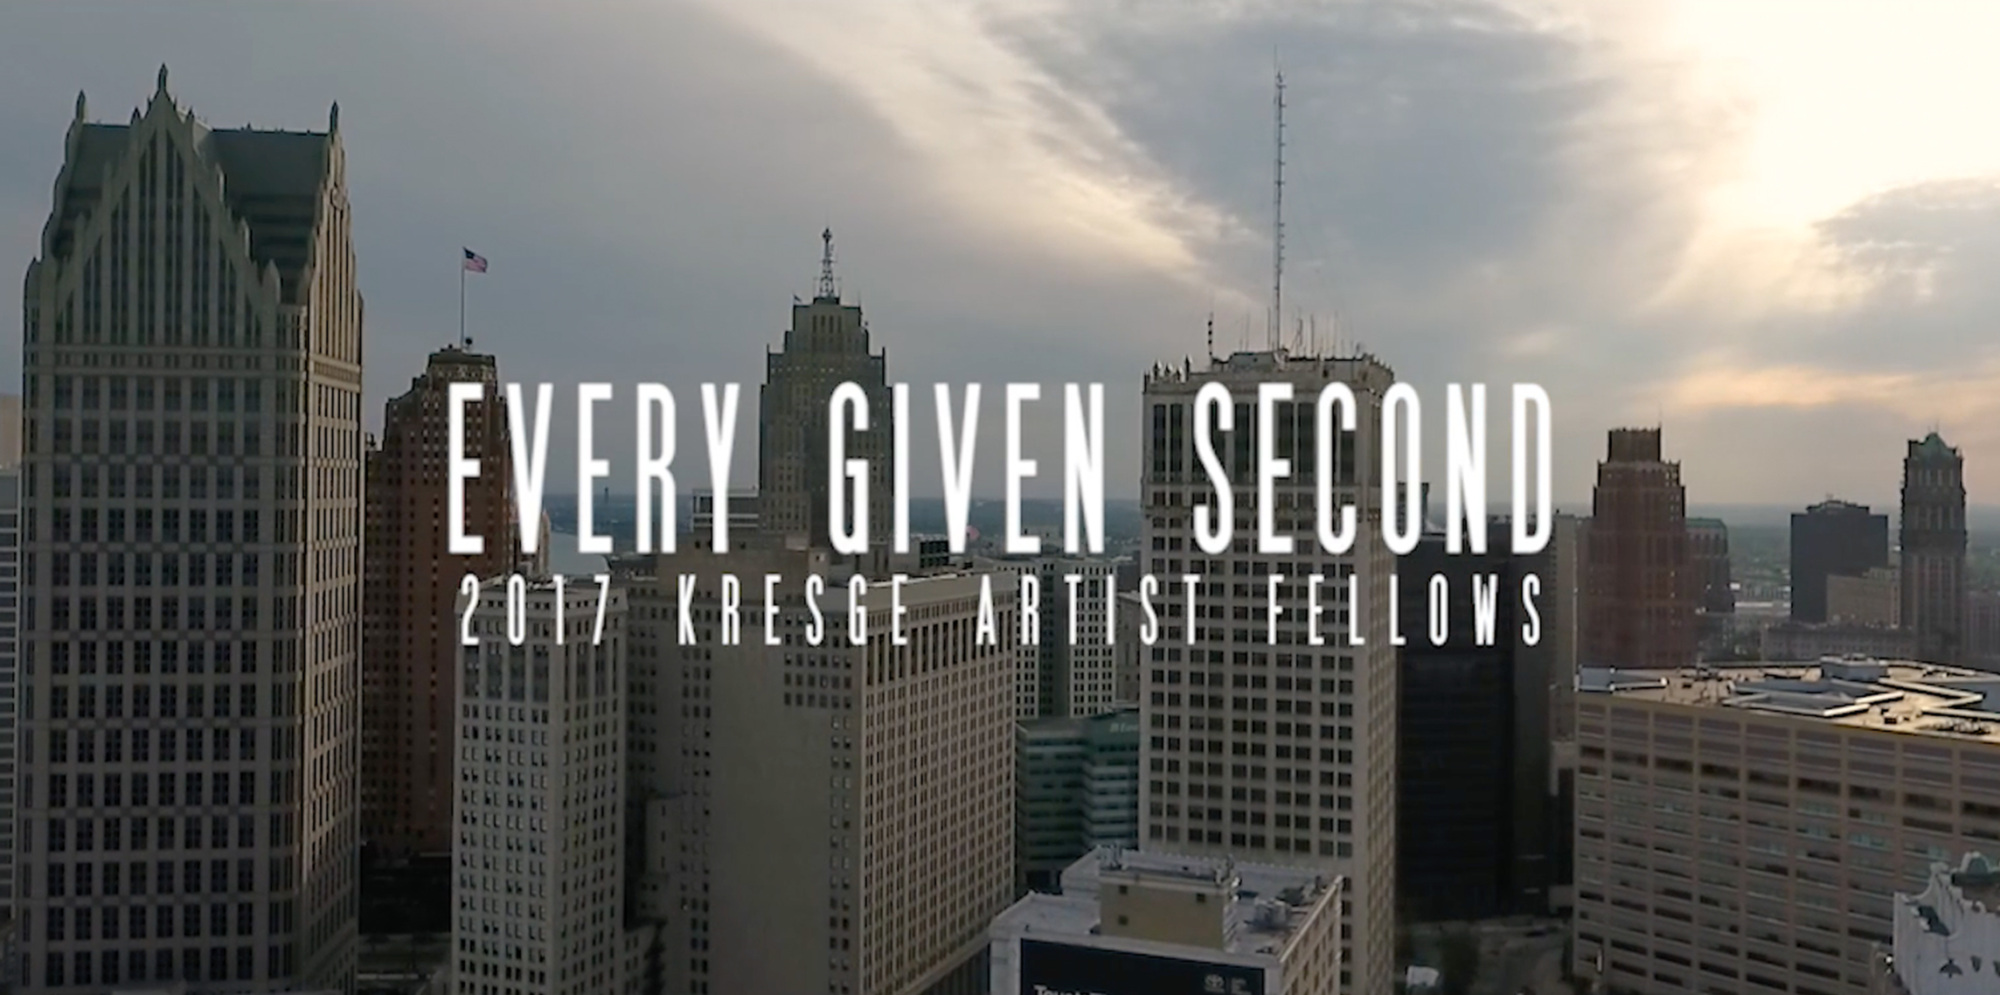 Promotional intro still of the 2017 Kresge Artist fellowship feature length film titled "Every Given Second"